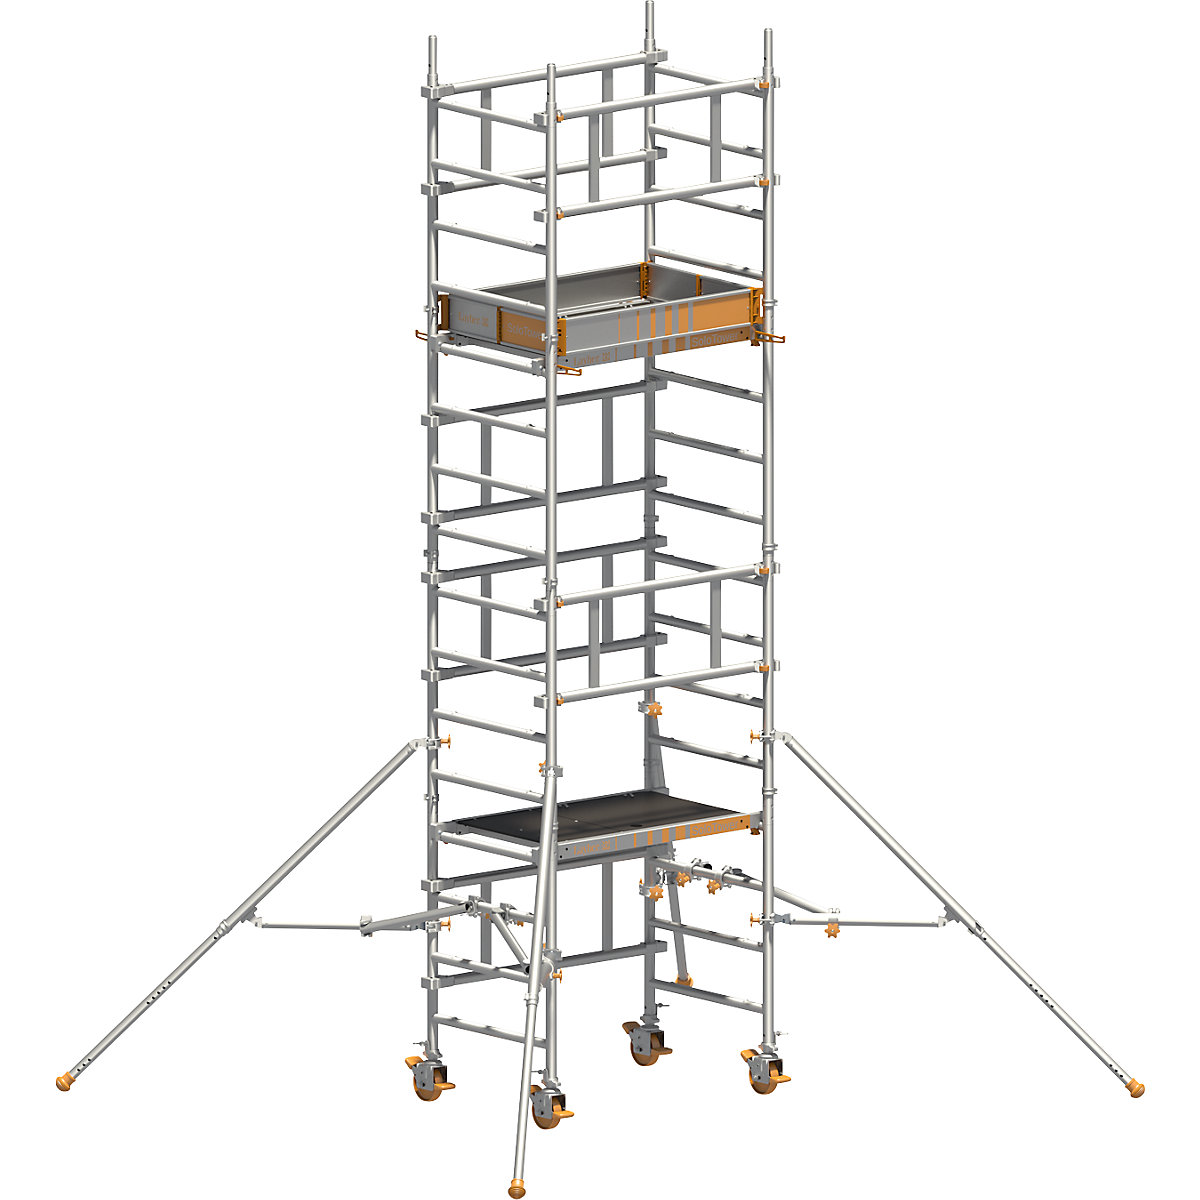 SoloTower one-person mobile access tower – Layher, platform size 1.15 x 0.8 m, working height 5.15 m-3